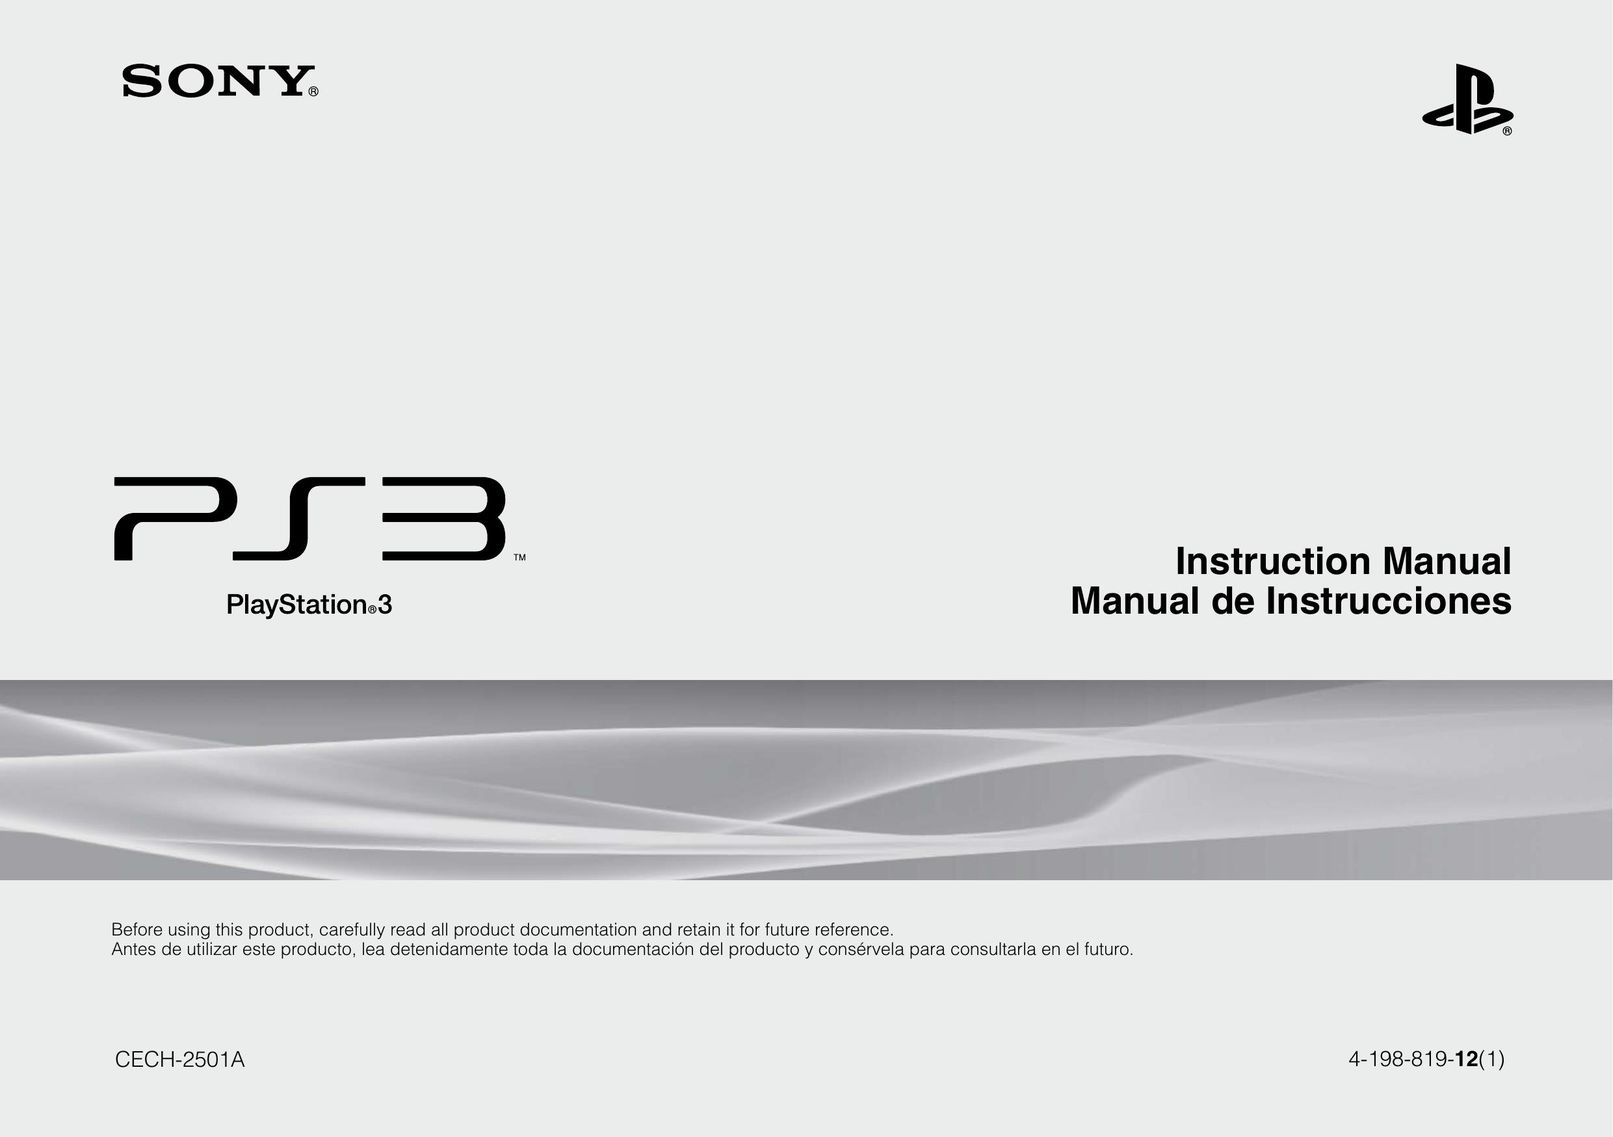 Sony 98331 Video Game Console User Manual